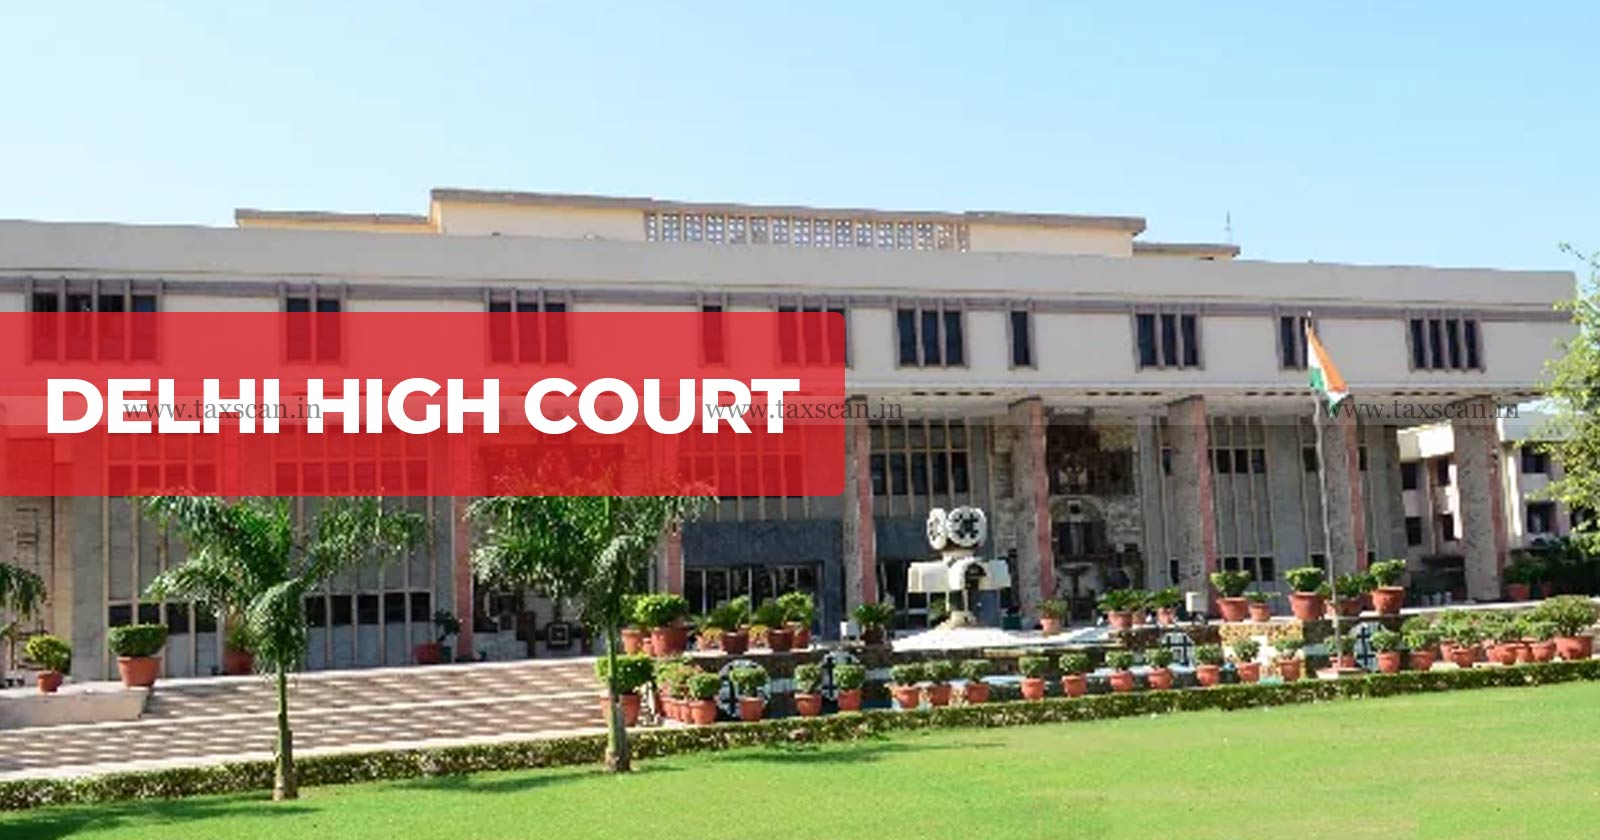 Delhi High Court - Arms Length Price - Transfer Pricing Officer - ALP - TAXSCAN